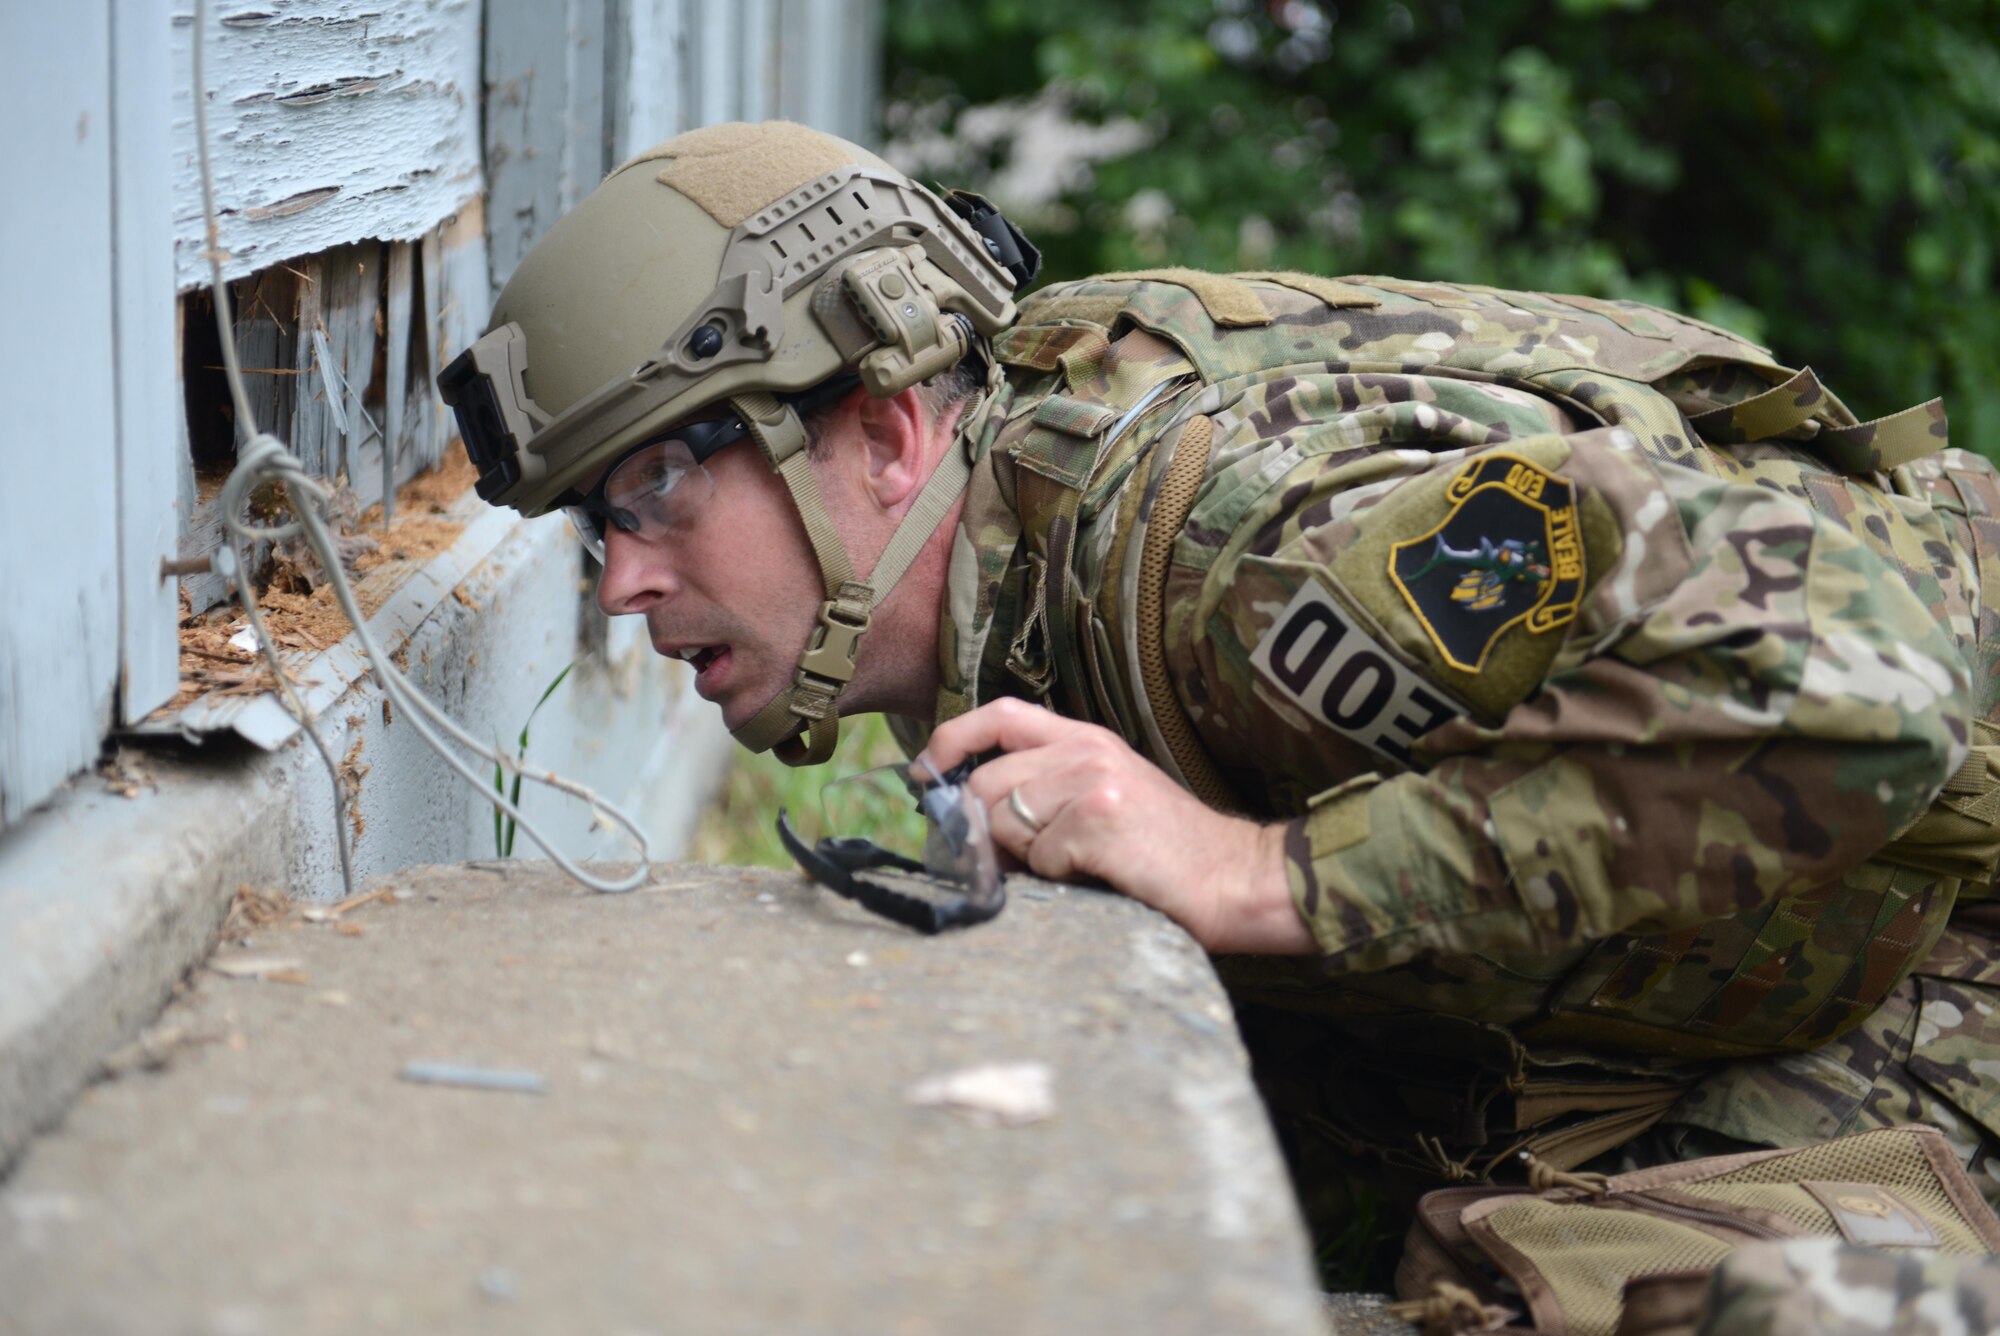 Tech. Sgt. Noah Cheney, 9th Civil Engineer Squadron explosive ordnance disposal technician, evaluates potential entry access points to an abandoned structure known as the “bomb factory” during Operation: Half-Life, an exercise designed to evaluate a synchronized, multi-agency response to a crisis situation May 5th, 2016, at Clear Lake, California. The structure Cheney needed access to contained various improvised explosive devices. (U.S. Air Force photo by Senior Airman Bobby Cummings)